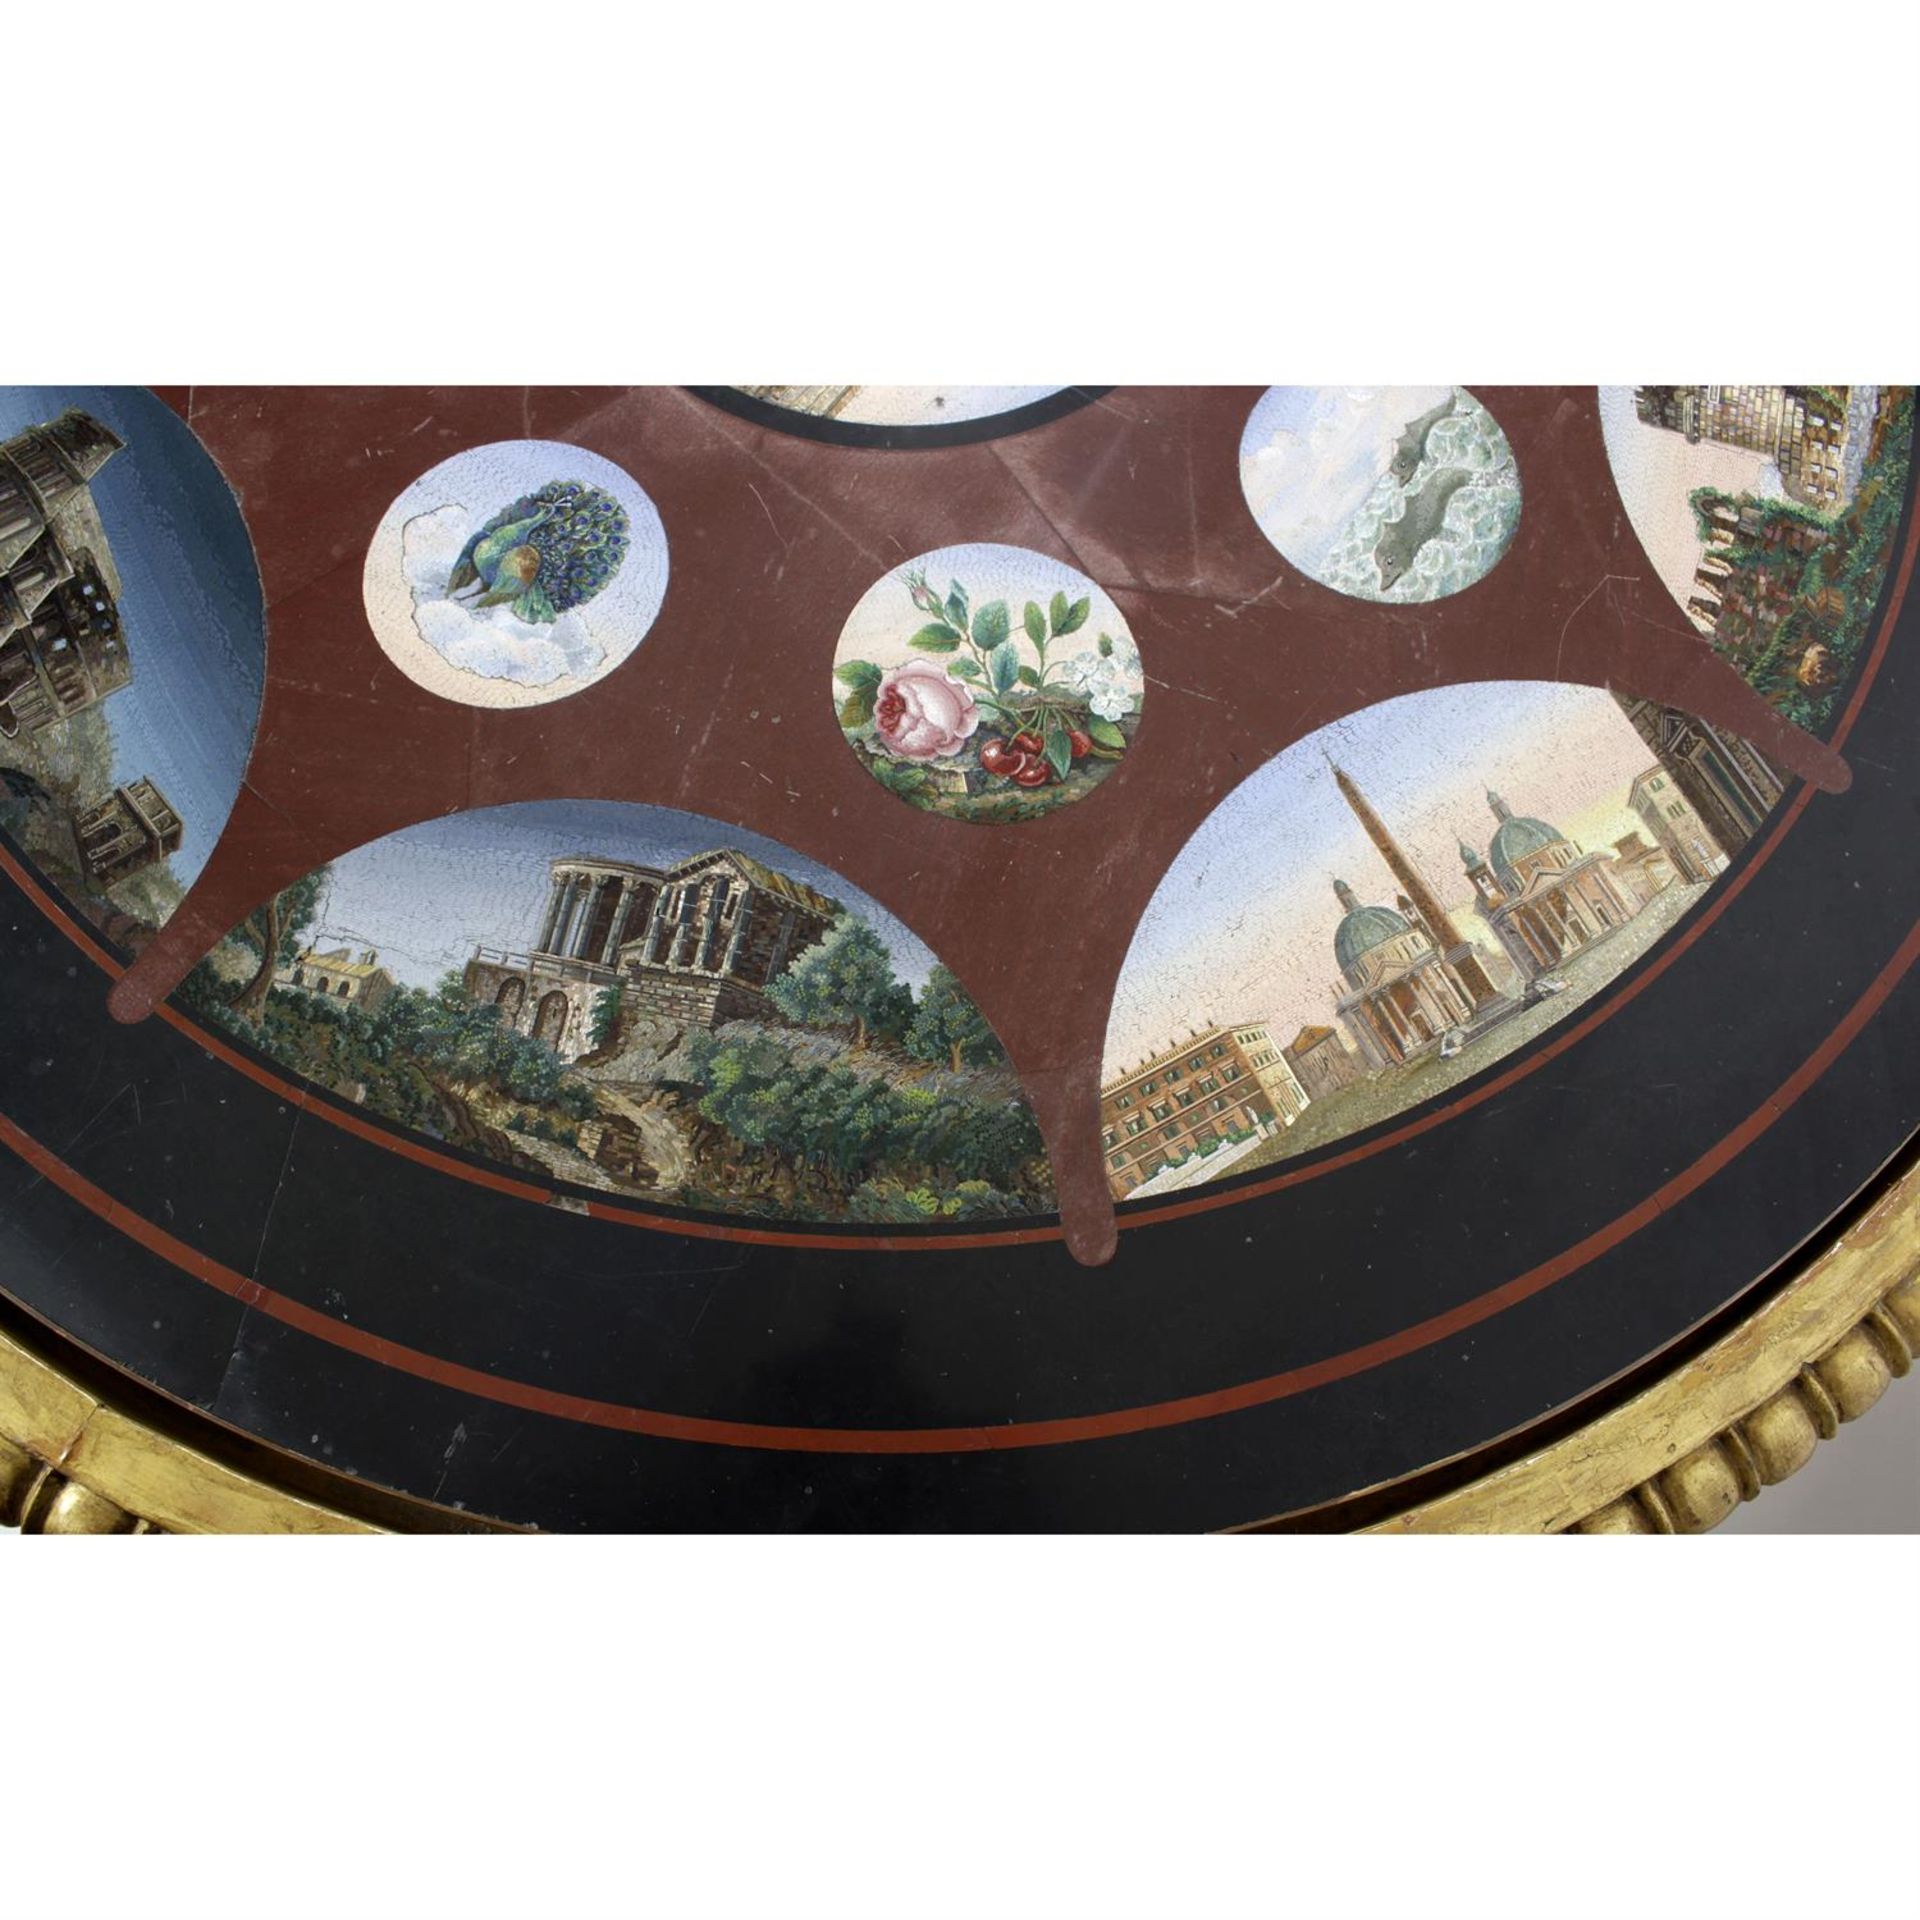 A 19th century Italian micromosaic table. - Image 7 of 26